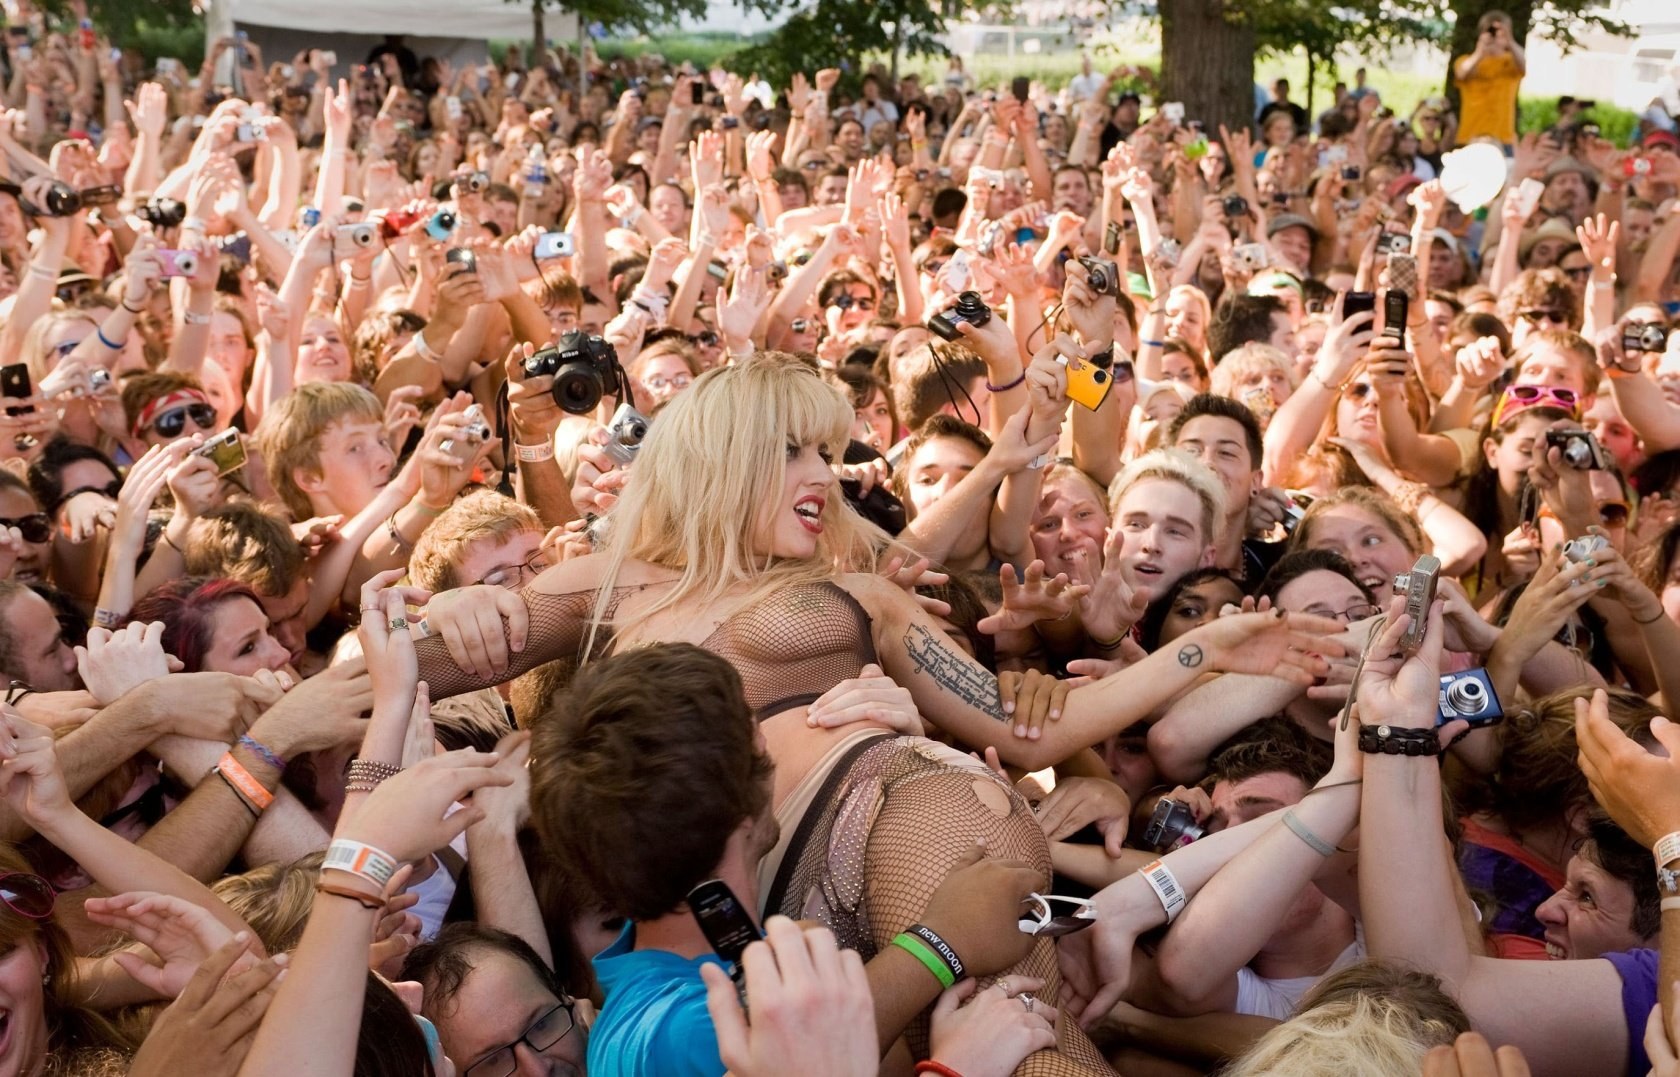 Naked in crowd